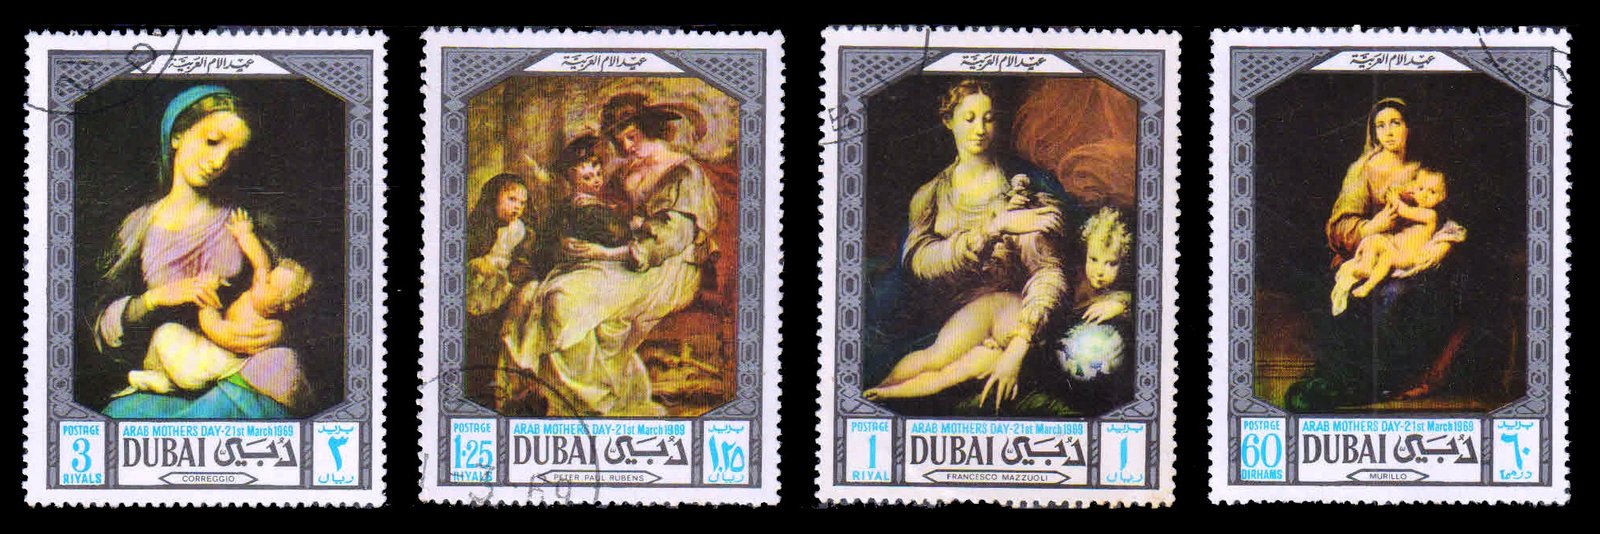 DUBAI 1969 - Arab Mothers Day. Paintings. Madonna & Child. Set of 4, Used. S.G. 325-328